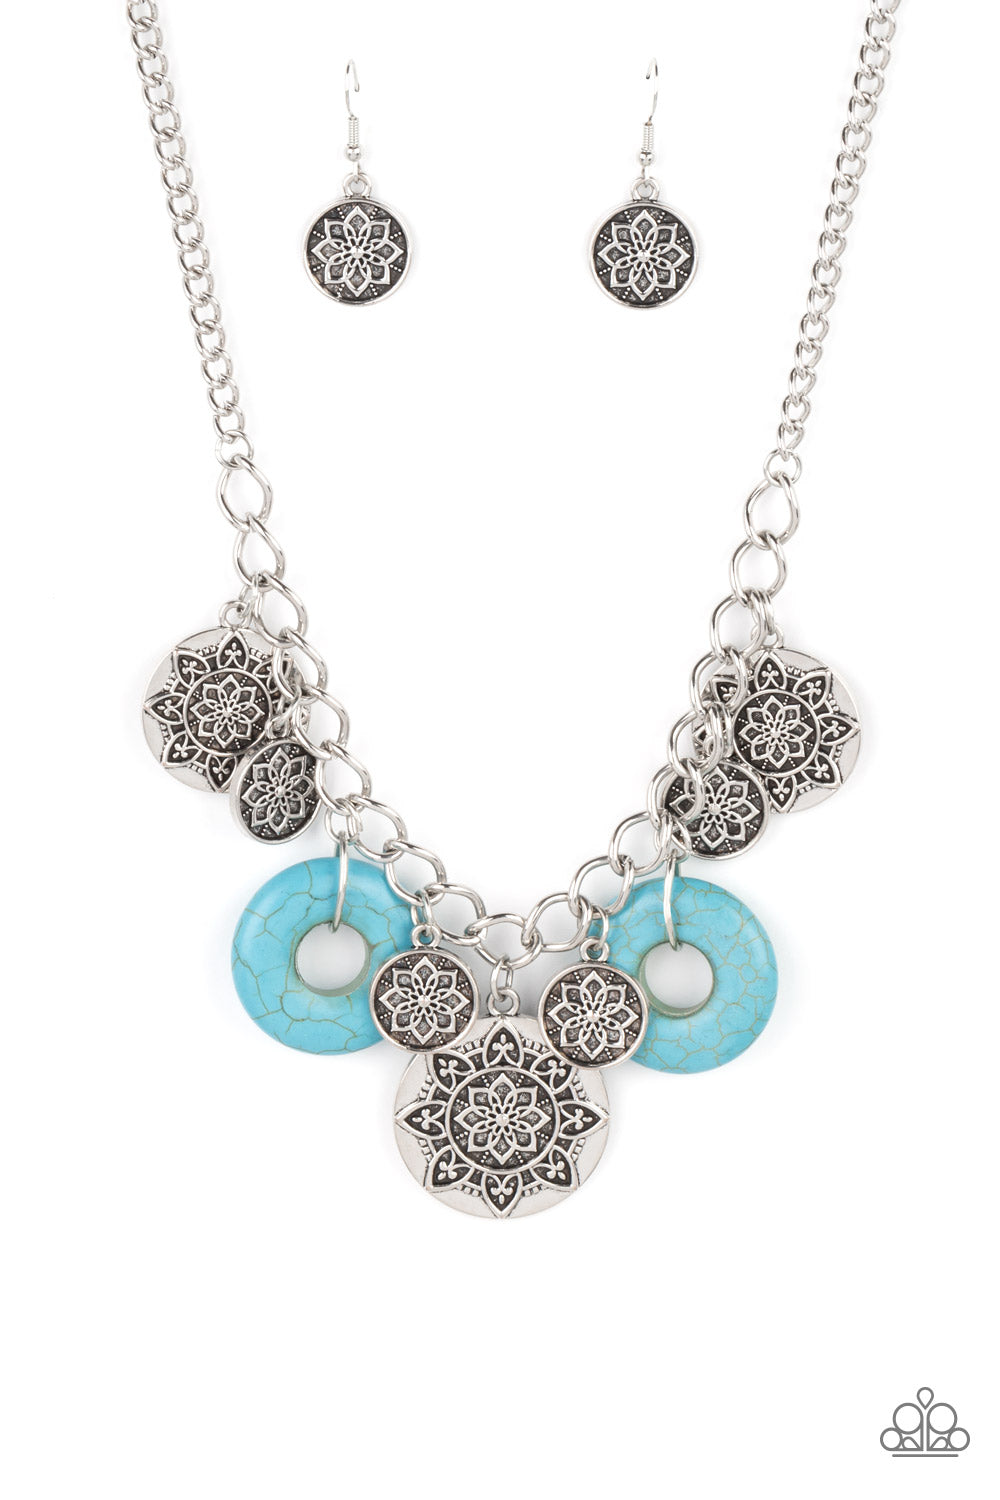 Western Zen Turquoise Necklace - Paparazzi Accessories  A collection of silver discs, embellished with intricate mandala-like designs, dances along a thick silver chain, with a pair of polished turquoise stone rings adding a pop of color to the rustic design. Features an adjustable clasp closure.  Sold as one individual necklace. Includes one pair of matching earrings.